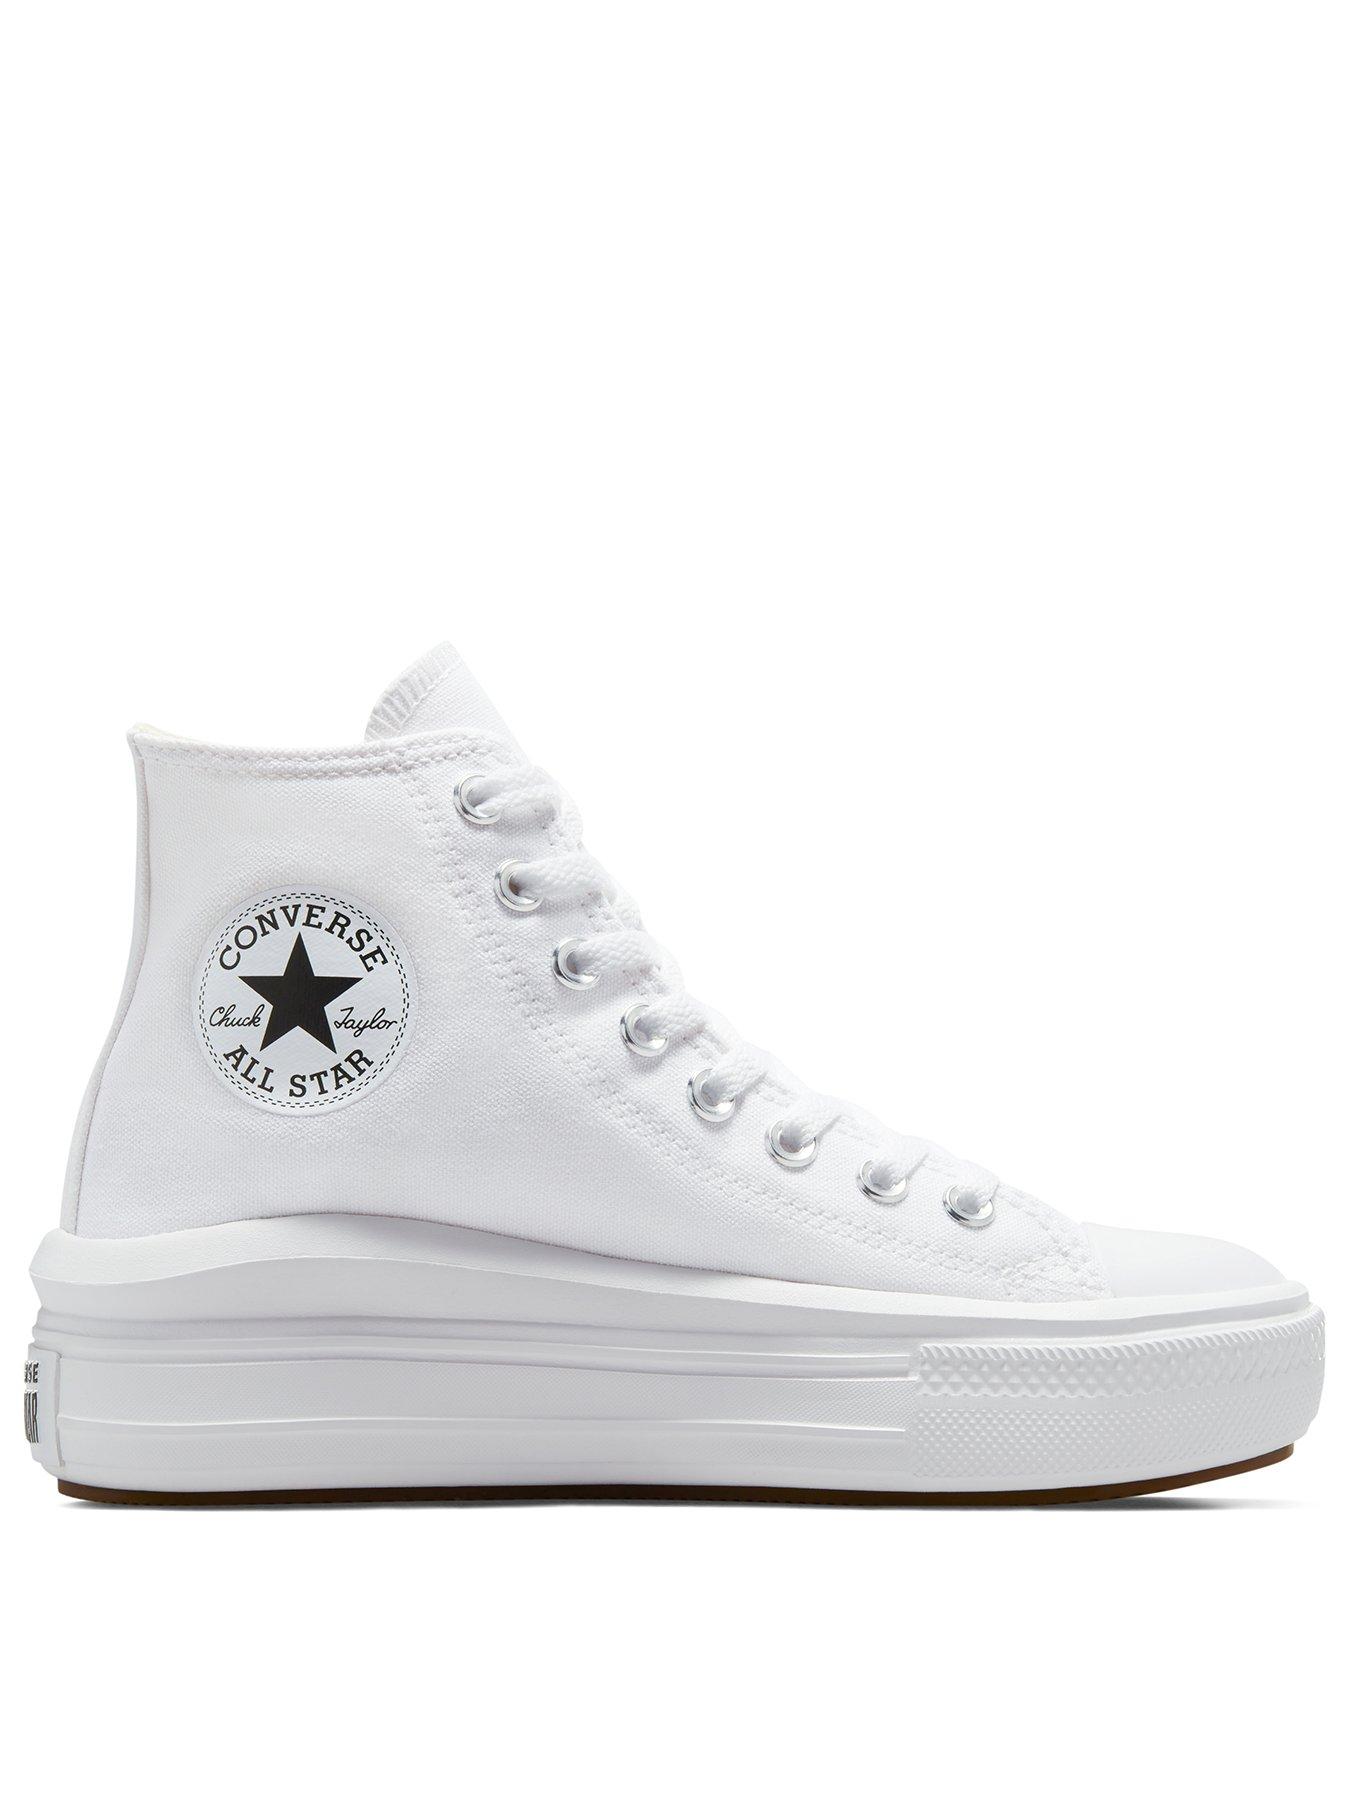 all white low cut converse